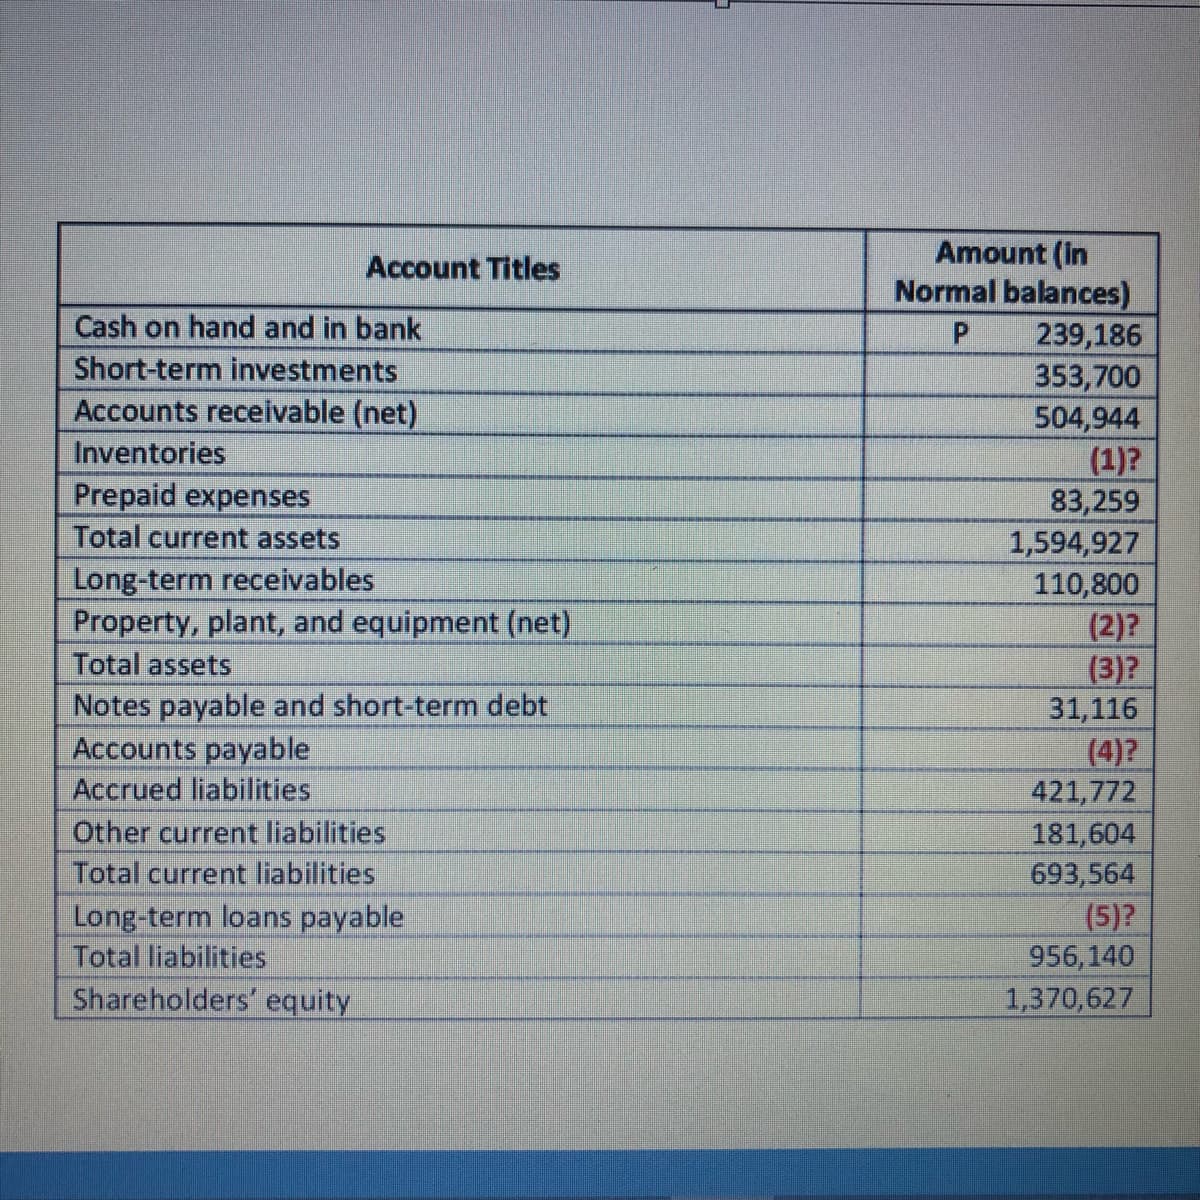 Amount (in
Normal balances)
239,186
353,700
Account Titles
Cash on hand and in bank
Short-term investments
Accounts receivable (net)
504,944
(1)?
83,259
1,594,927
110,800
(2)?
(3)?
31,116
(4)?
Inventories
Prepaid expenses
Total current assets
Long-term receivables
Property, plant, and equipment (net)
Total assetS
Notes payable and short-term debt
Accounts payable
Accrued liabilities
421,772
Other current liabilities
Total current liabilities
Long-term loans payable
Total liabilities
Shareholders' equity
181,604
693,564
(5)?
956,140
1,370,627
